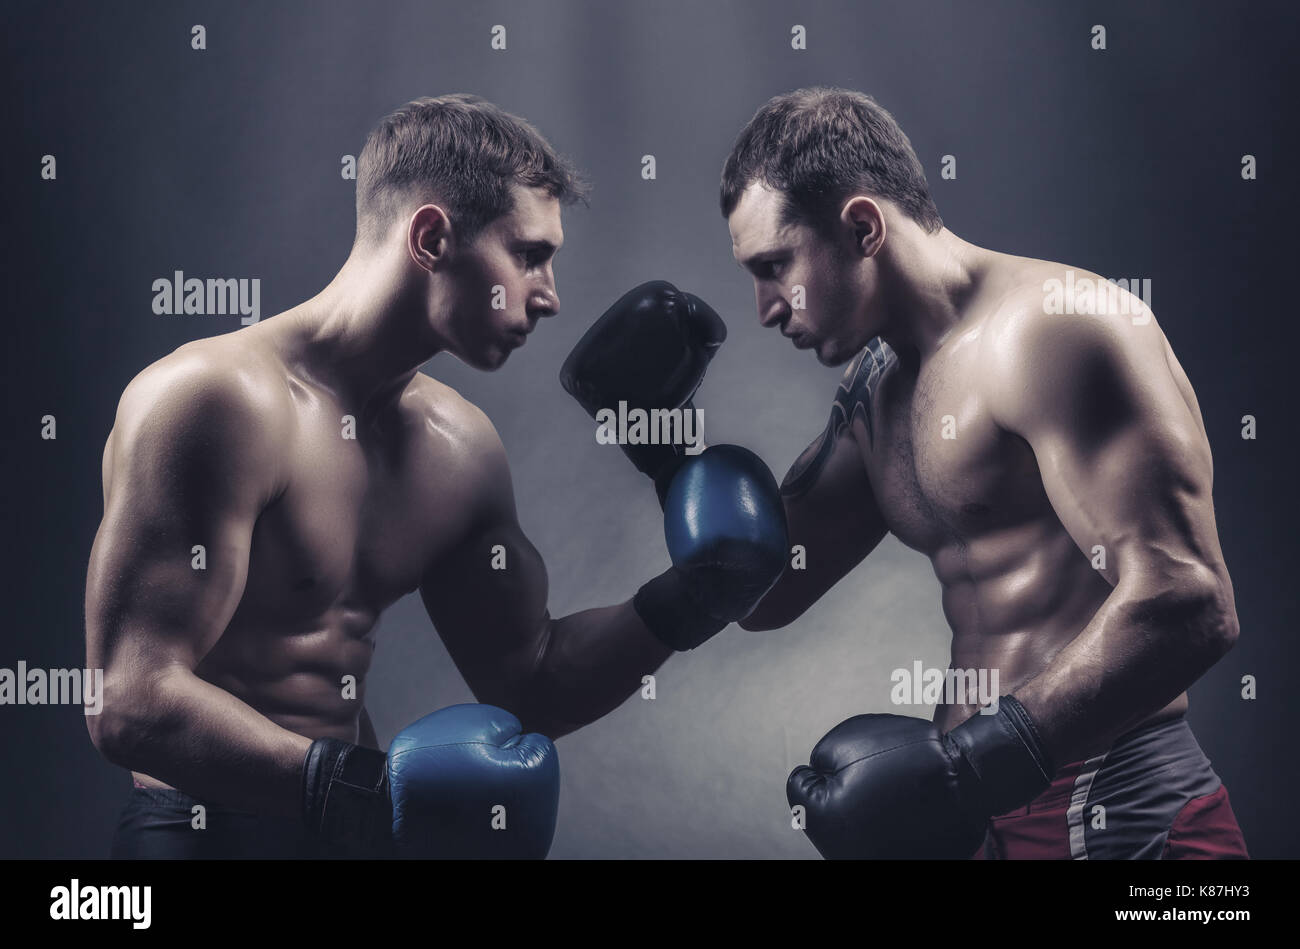 Two boxers in boxing gloves met with glances against a dark background Stock Photo